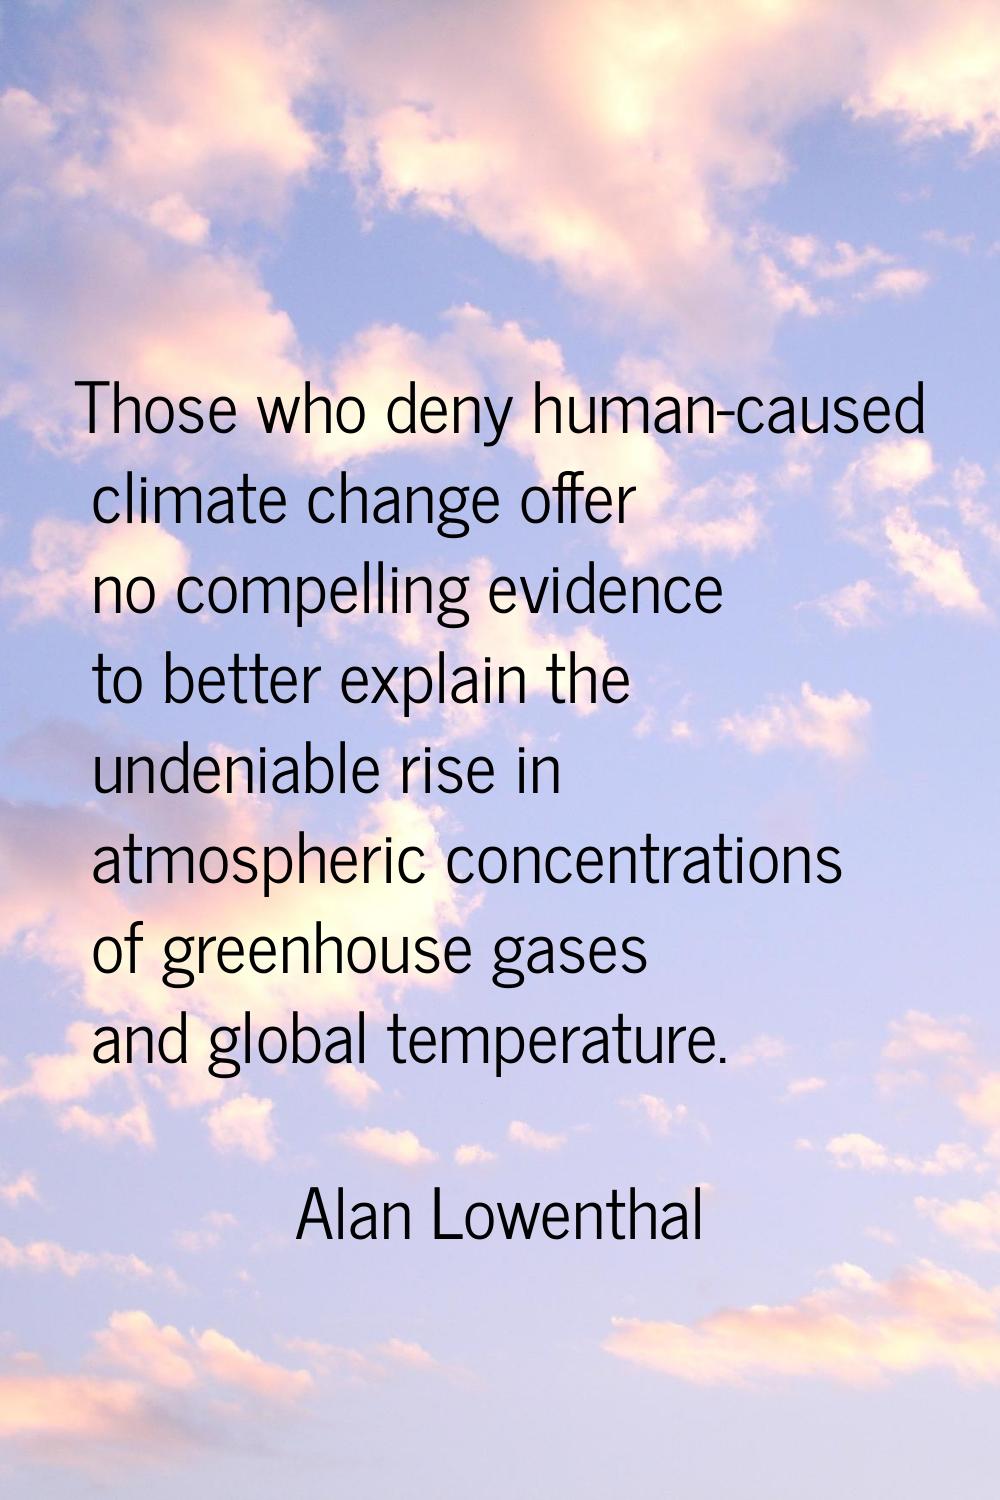 Those who deny human-caused climate change offer no compelling evidence to better explain the unden